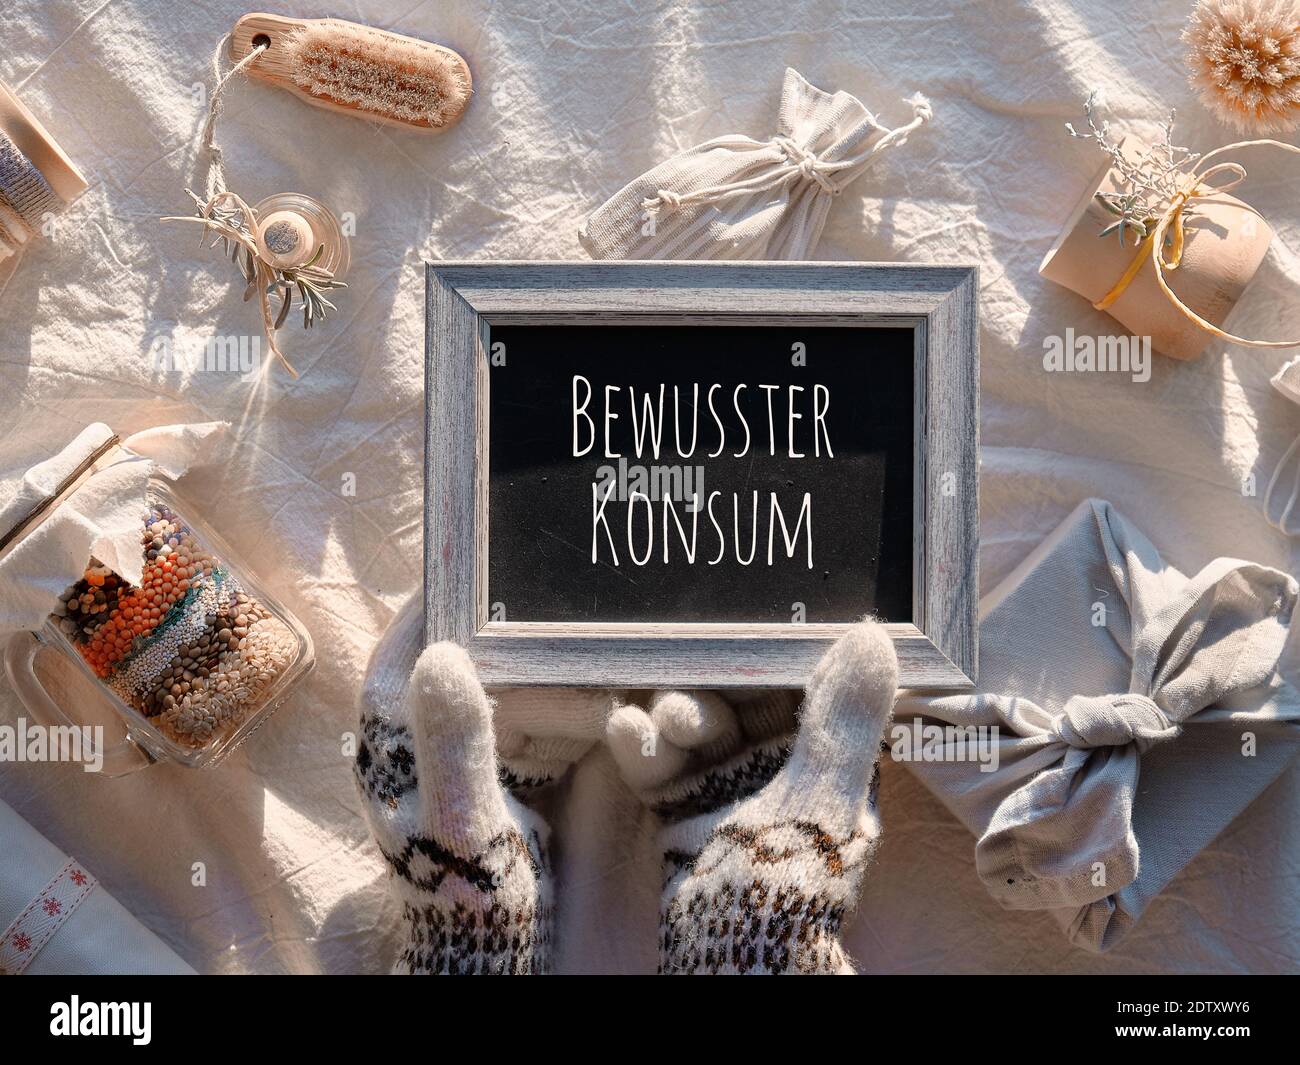 Blackboard with text Bewusster Konsum in German that means Conscious Consumption. Eco friendly gifts for winter holidays including Christmas Stock Photo